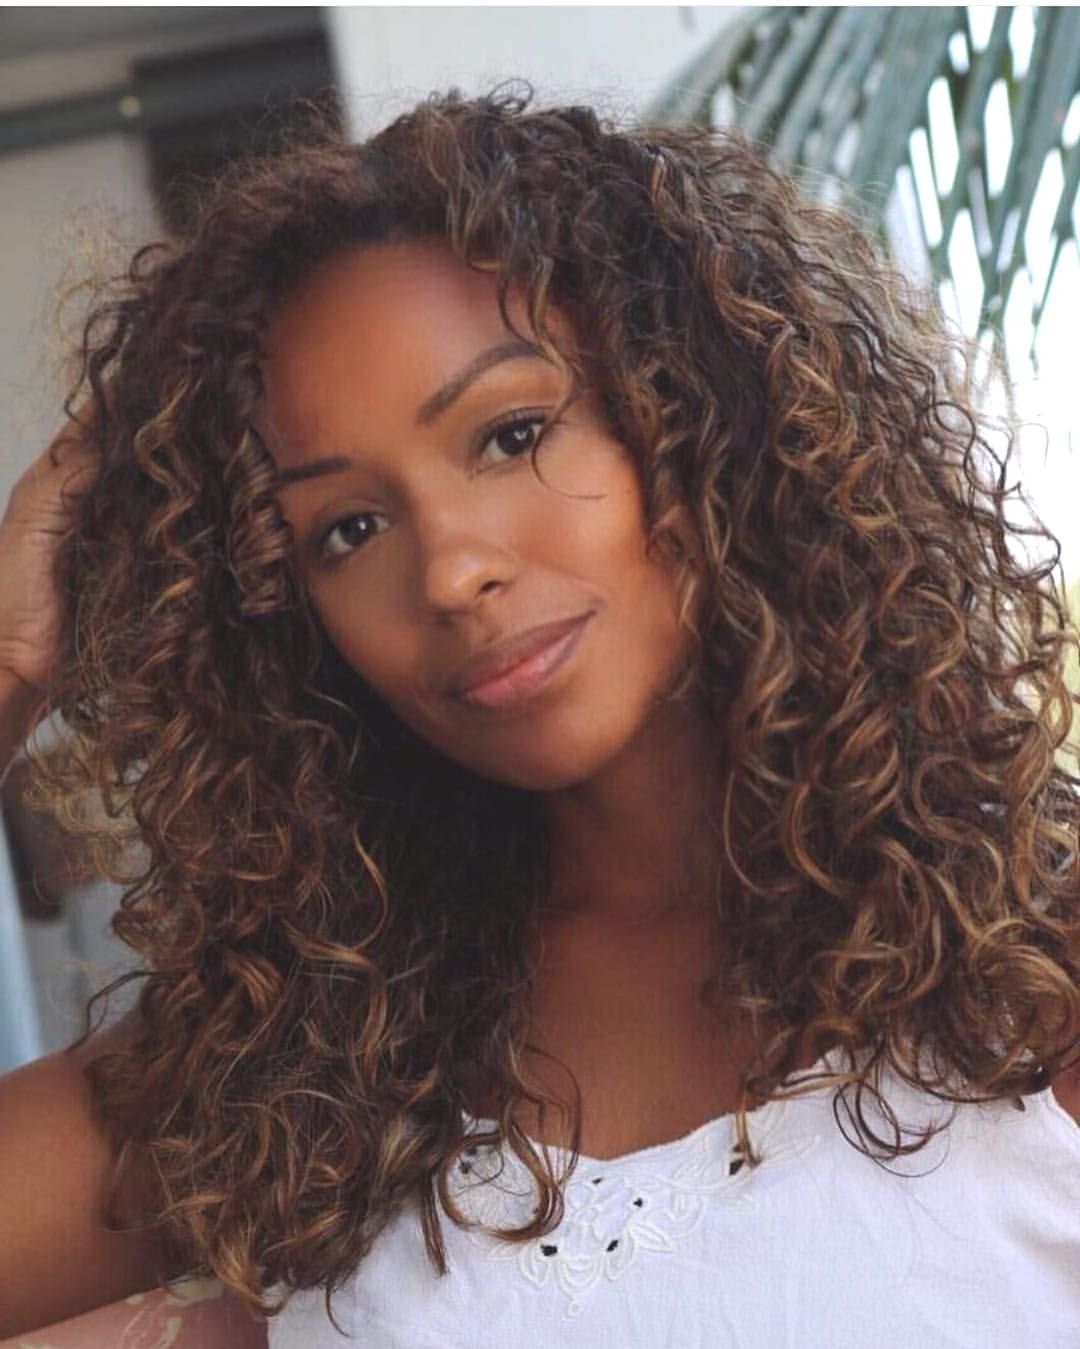 Hairstyles : Black Curly Hair With Blonde Highlights Pretty In Curls And Blonde Highlights Hairstyles (View 15 of 20)